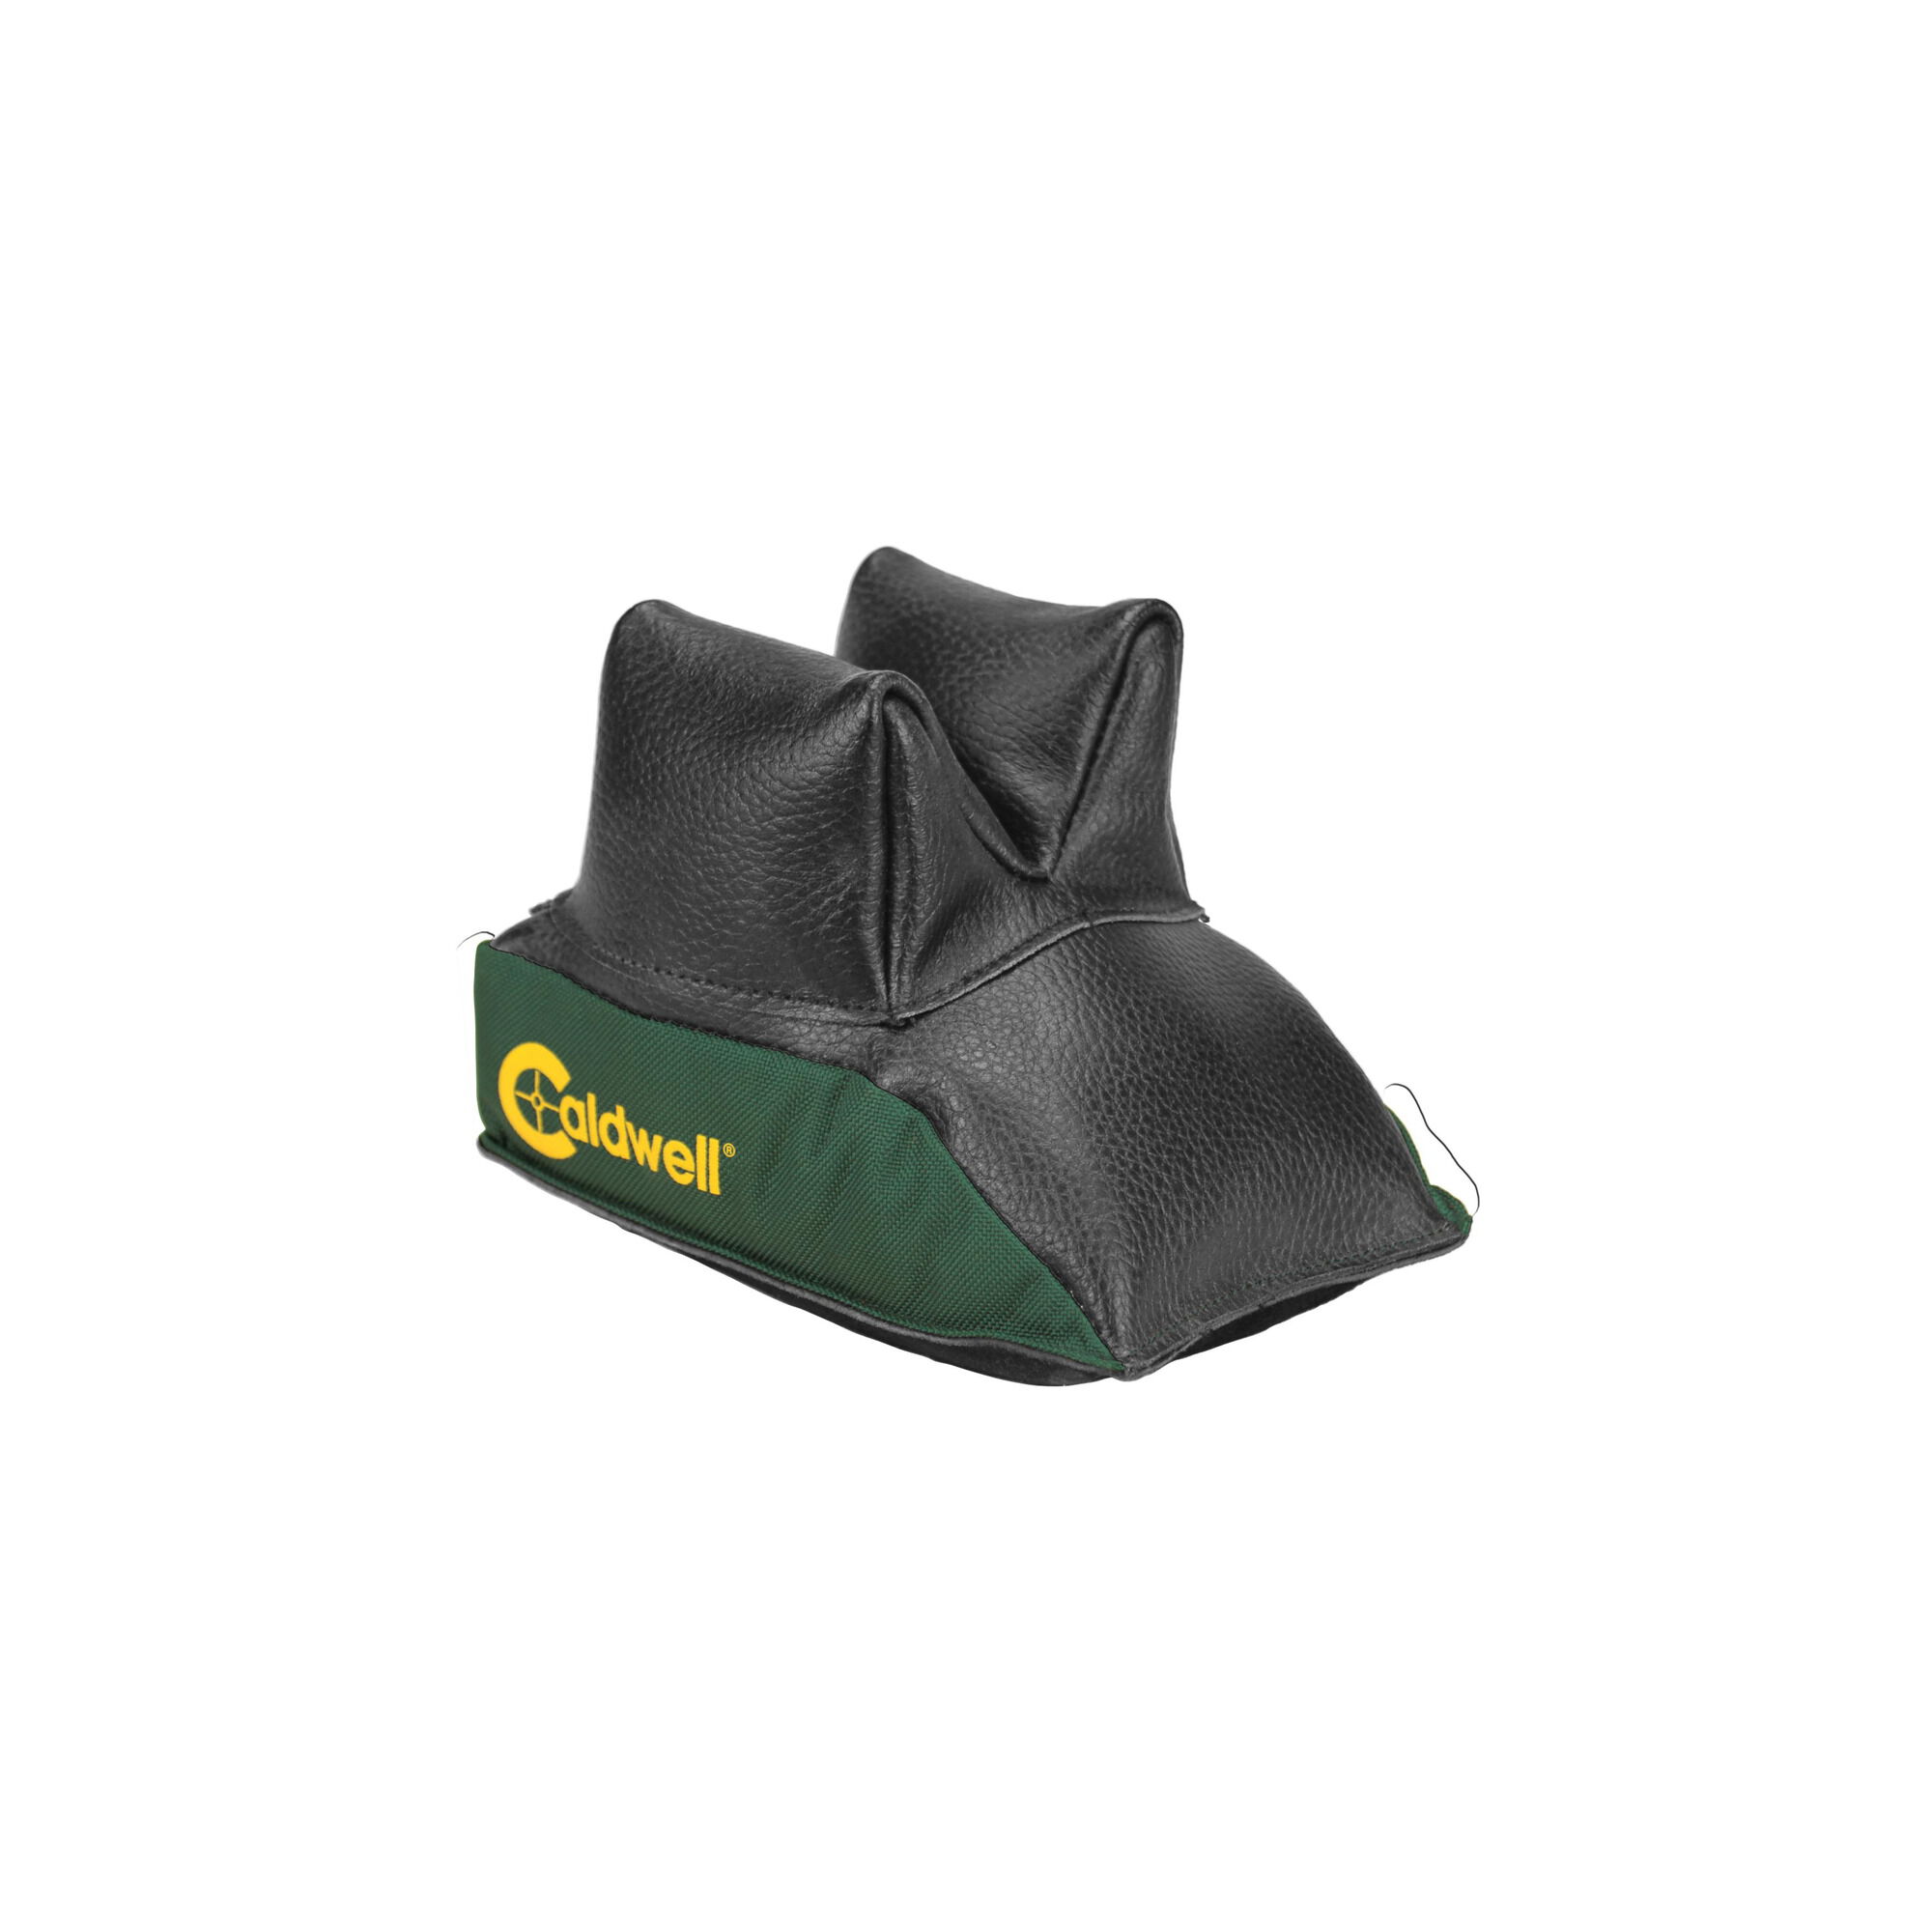 Shooting Accessories - Shooting Bags - Light Weight Shooting Bags - DI  Precision